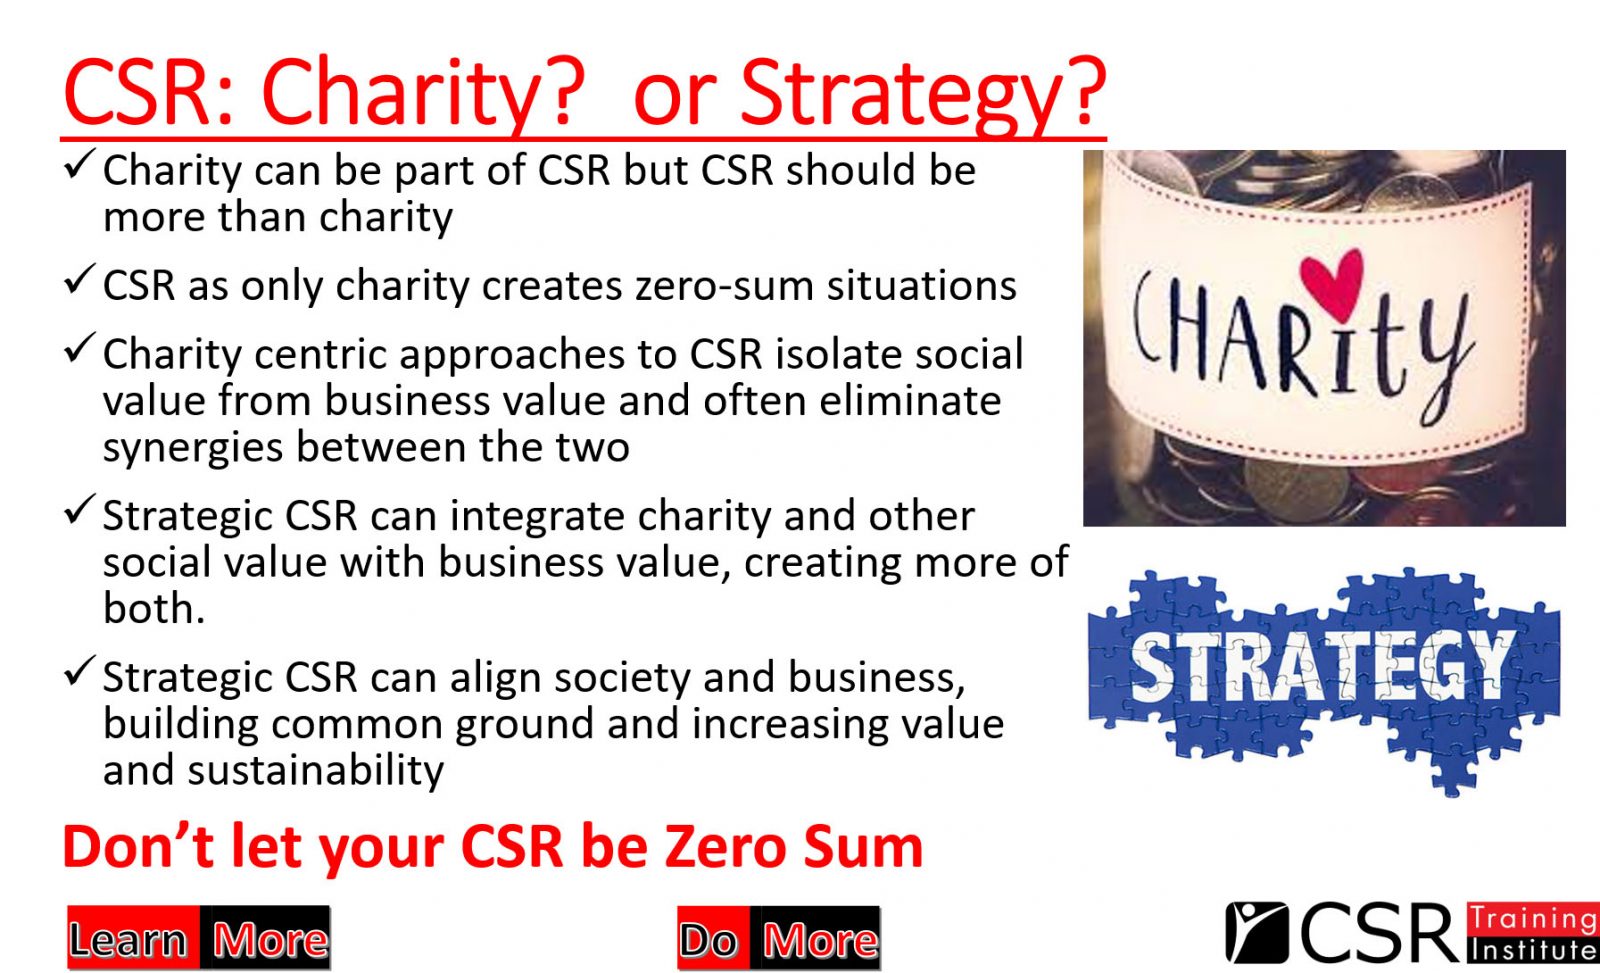 CSR strategy or charity?